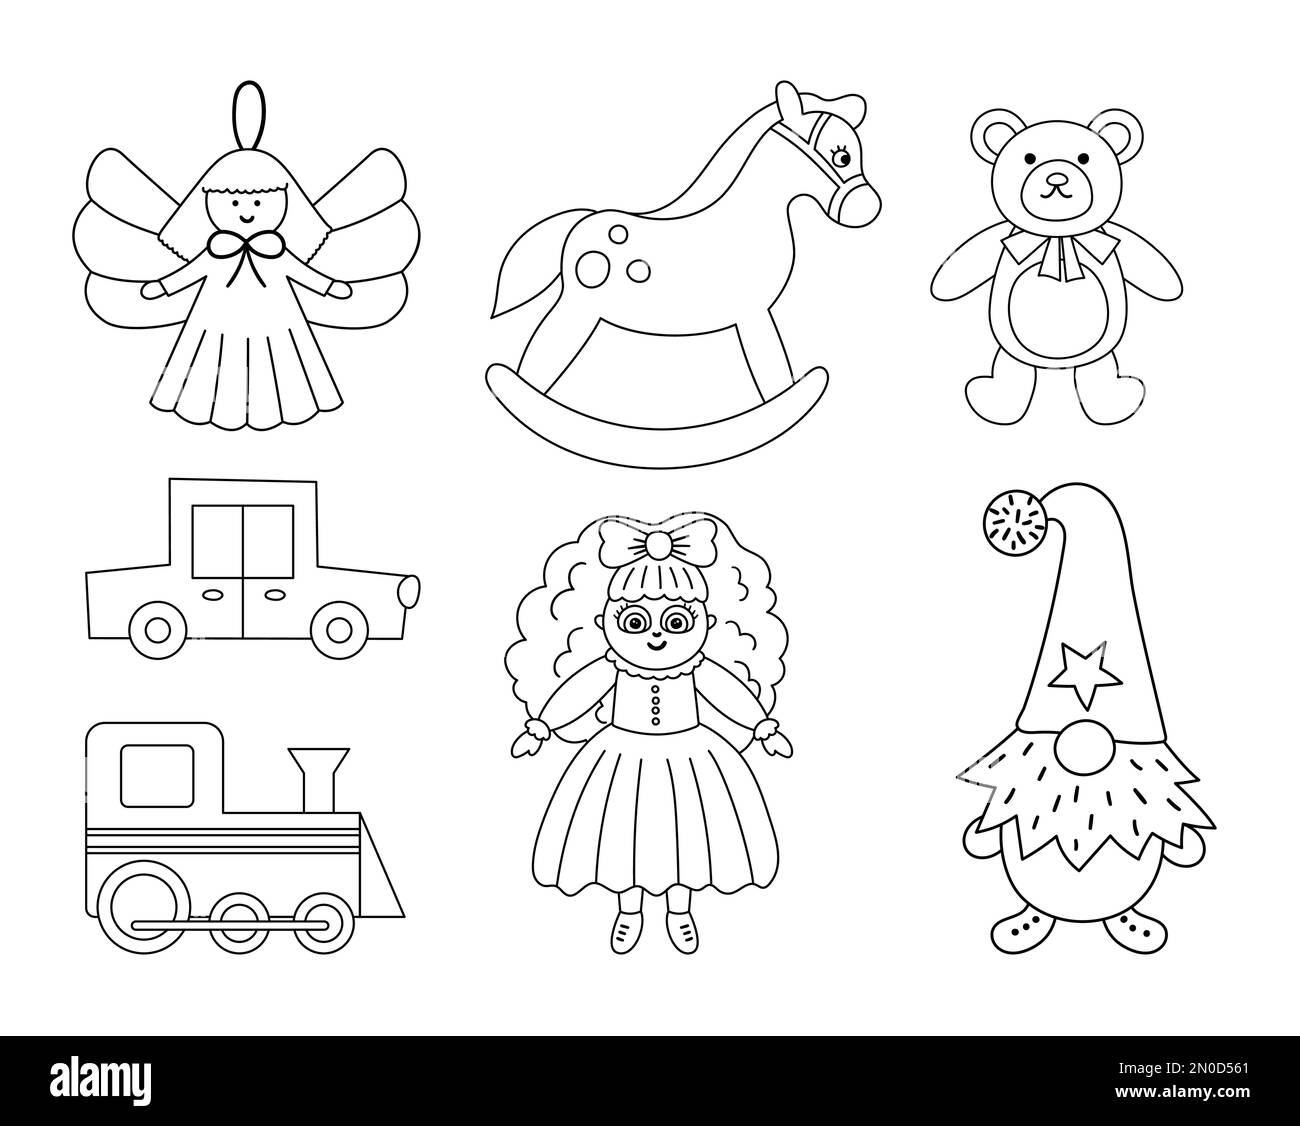 Cute Christmas black and white toys collection. Vector New Year line gifts for kids. Santa Claus presents for children. Rocking horse, Teddy bear, dol Stock Vector